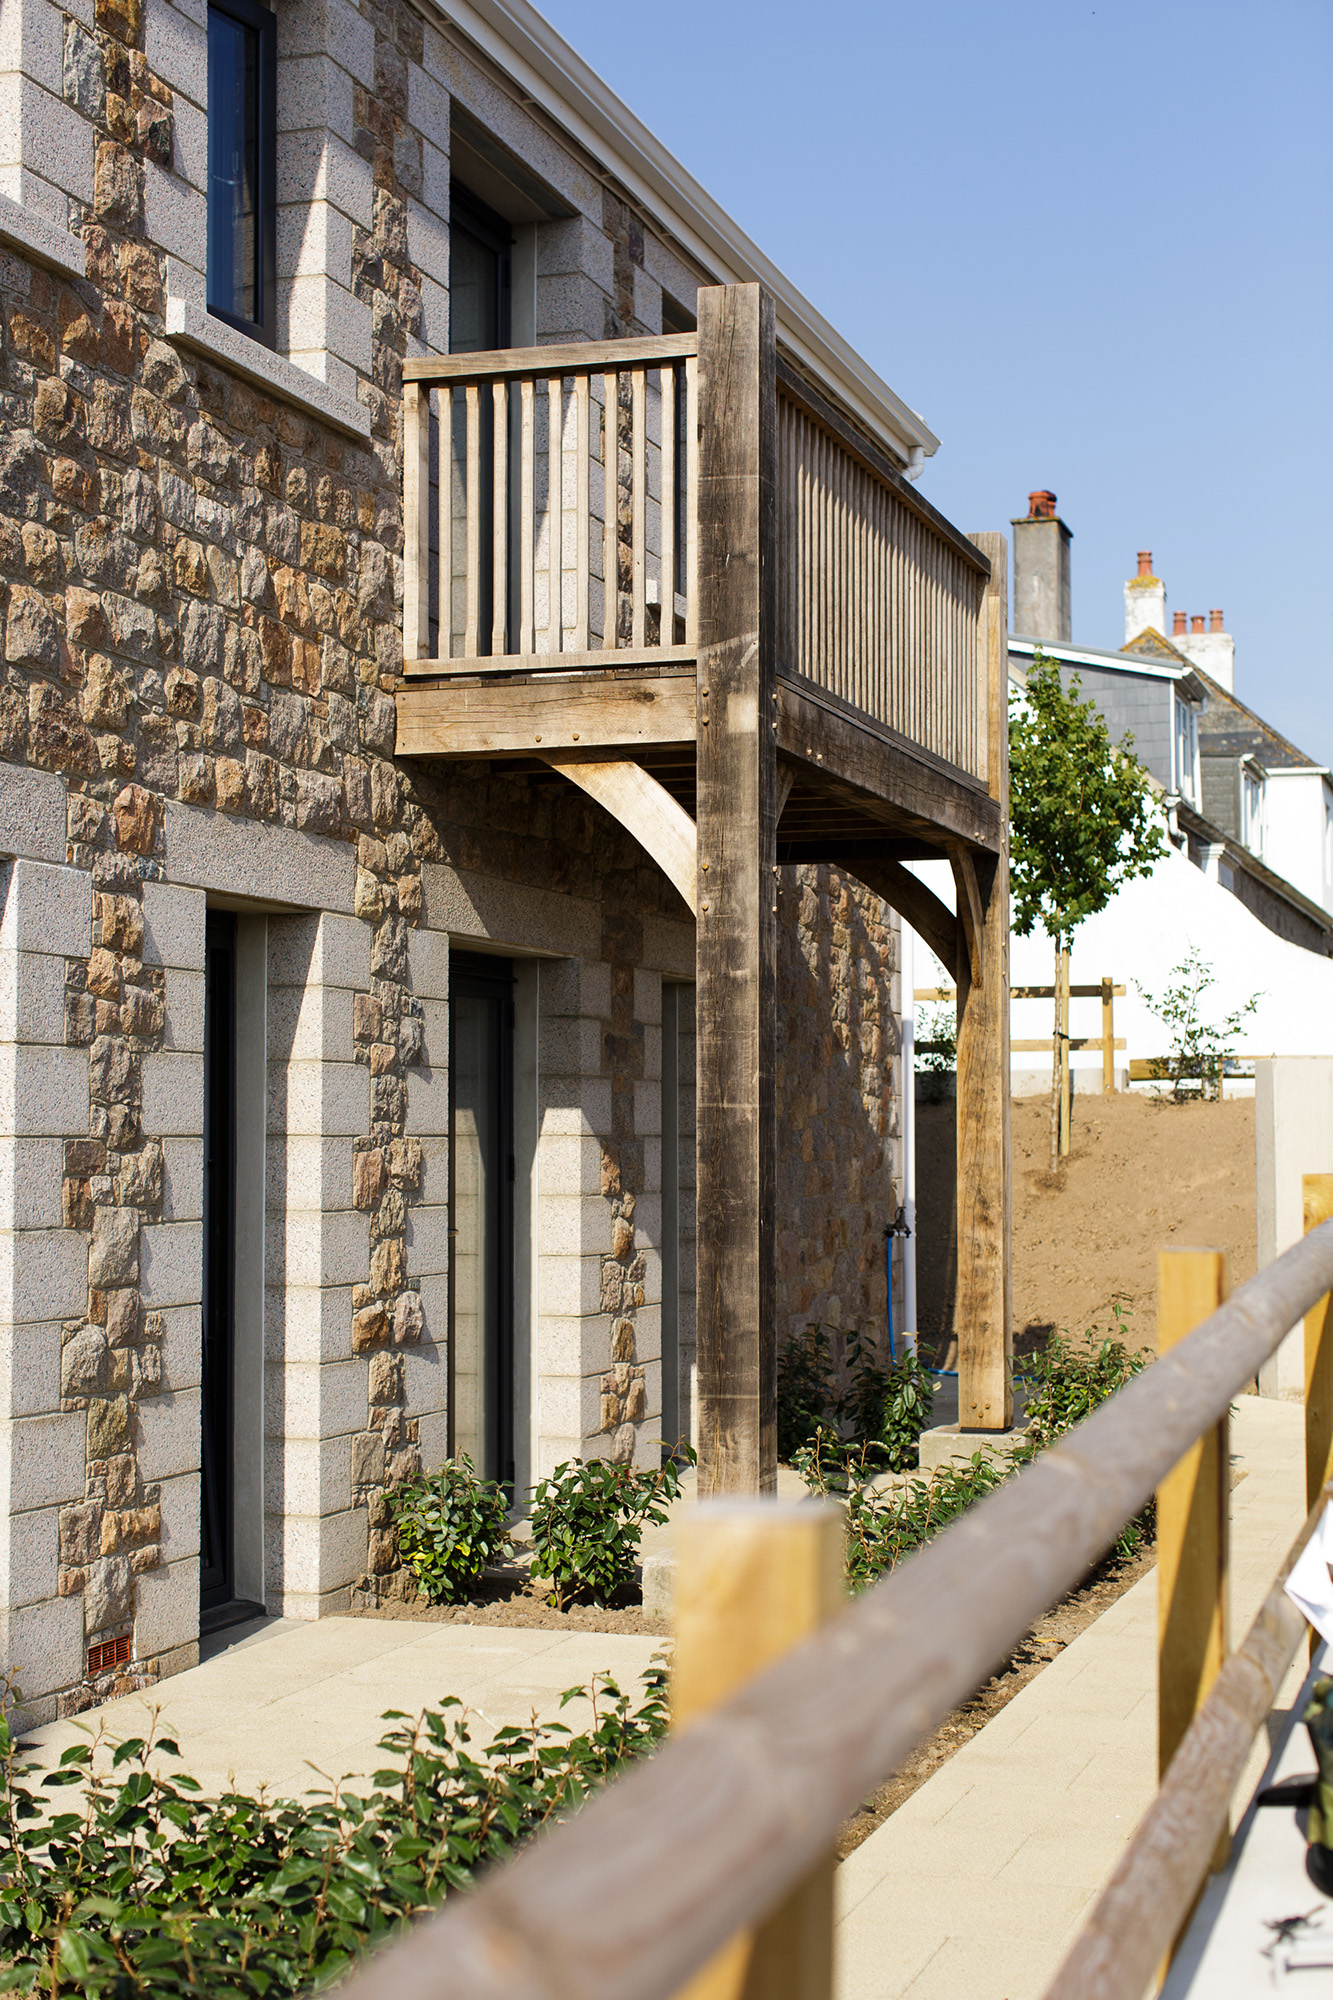 LES CHARRIERES | St. Peter, Jersey | Axis Mason